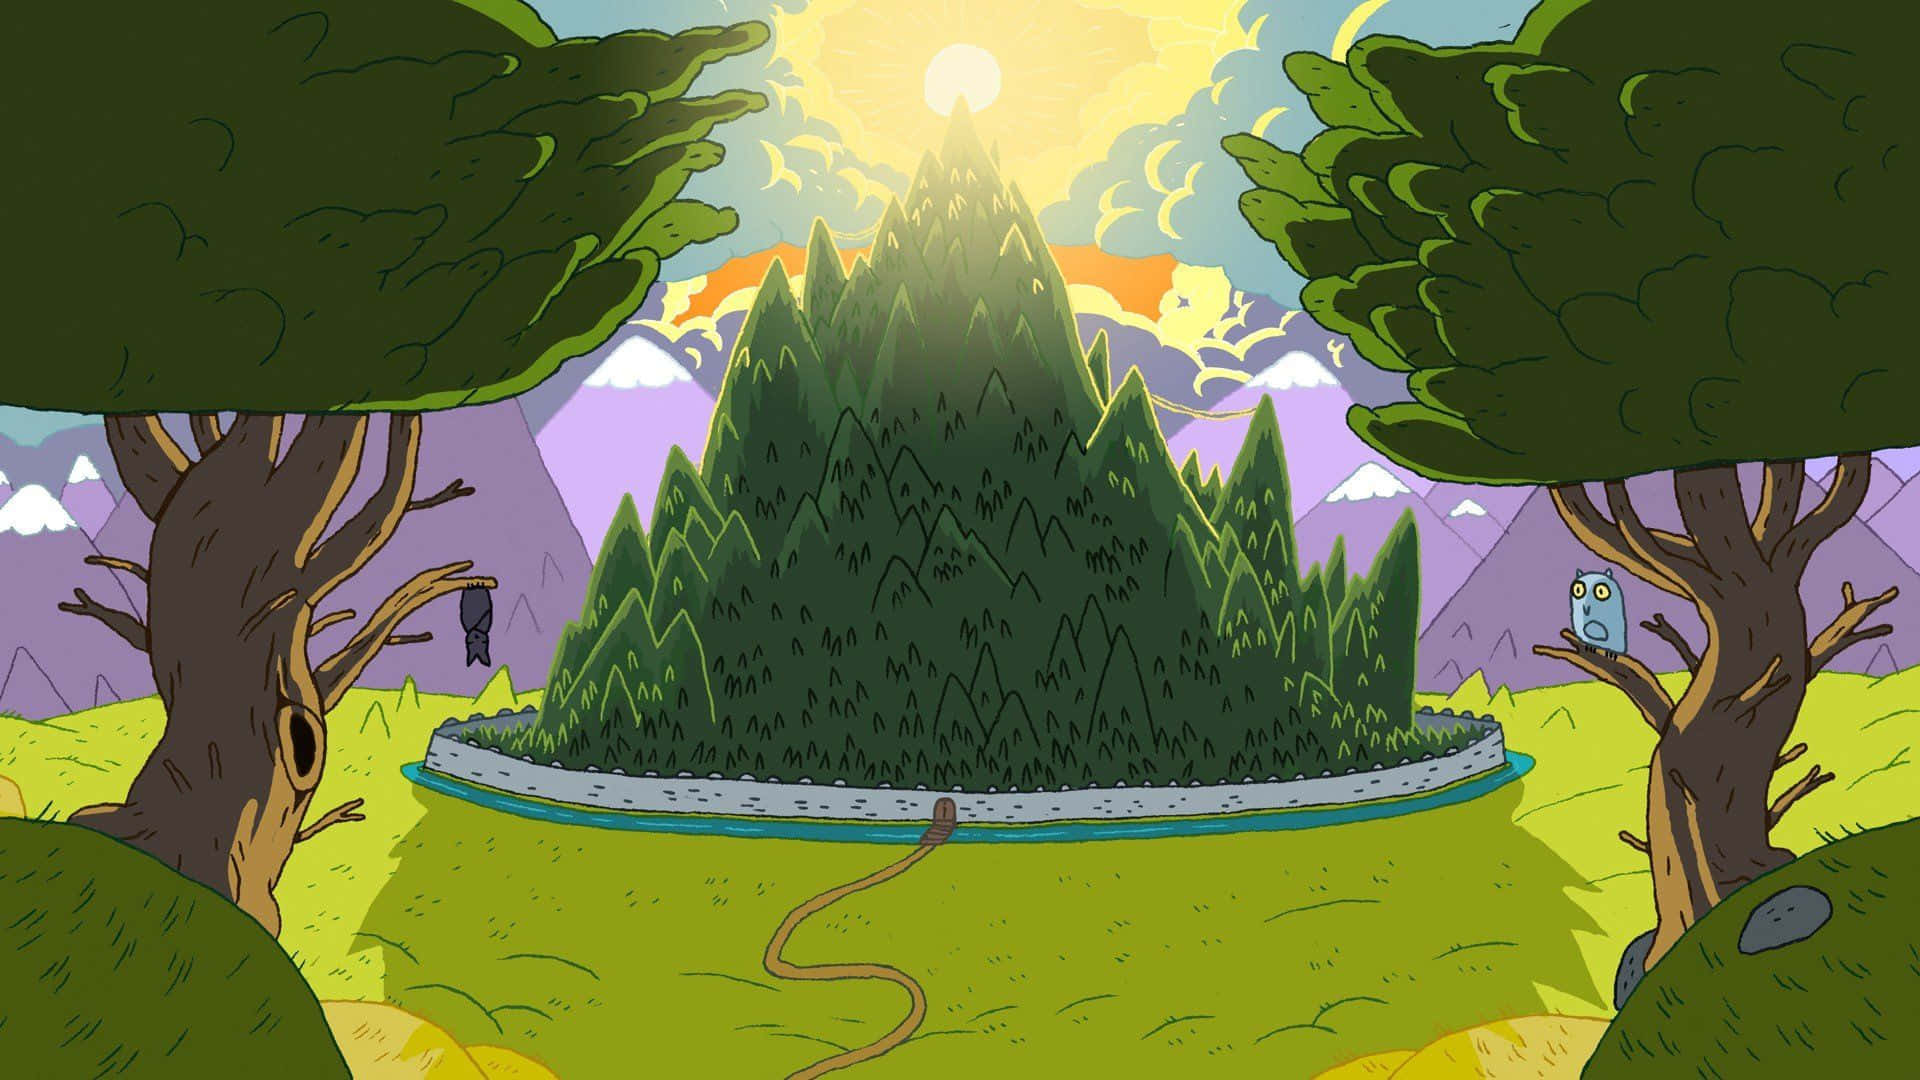 "Exploring unknown places with courage in Adventure Time Landscape" Wallpaper